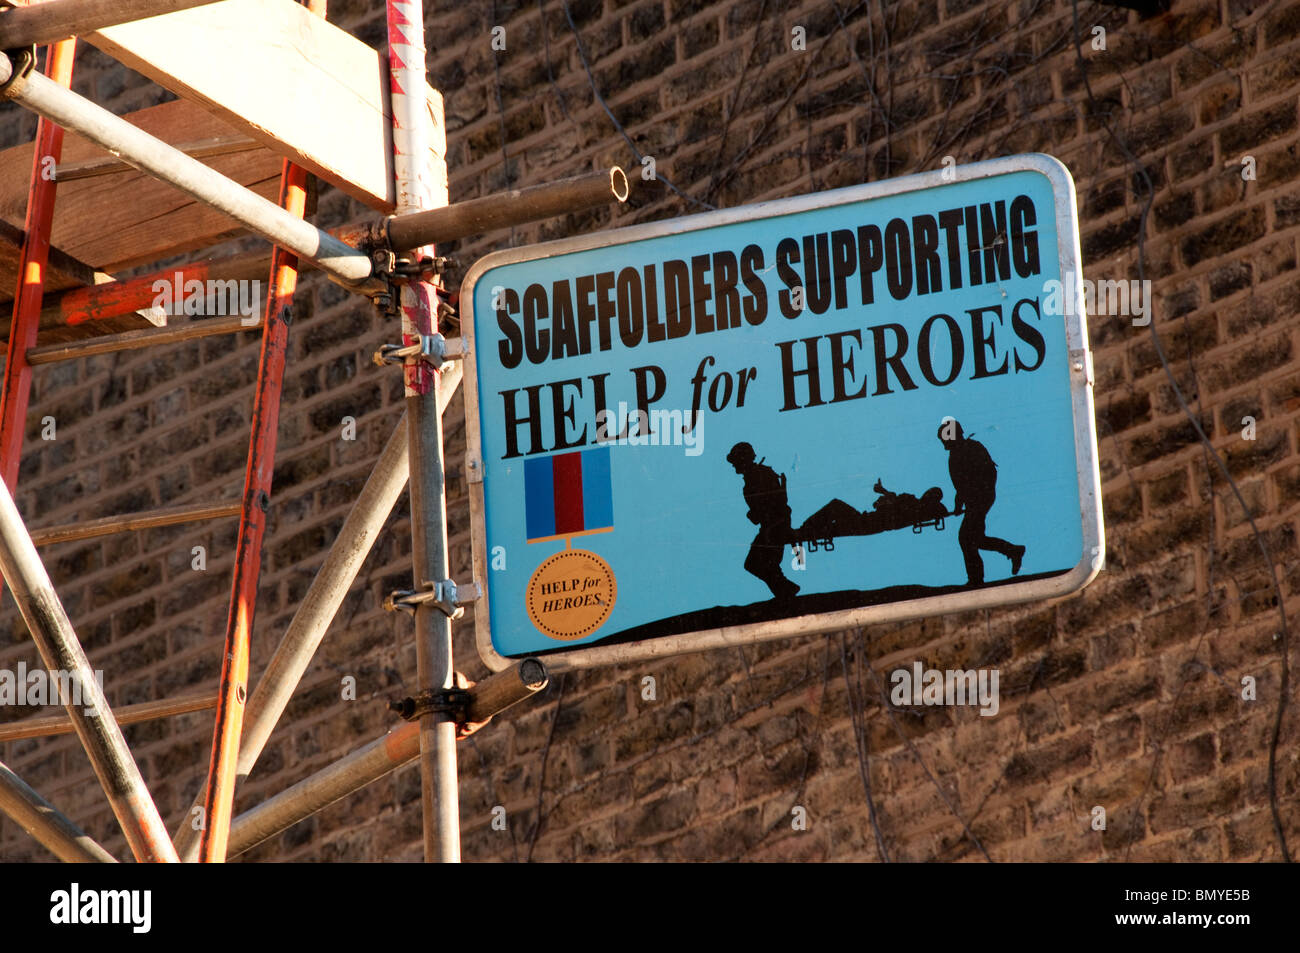 Scaffolders Supporting Help for Heroes sign on a building site in South London Stock Photo